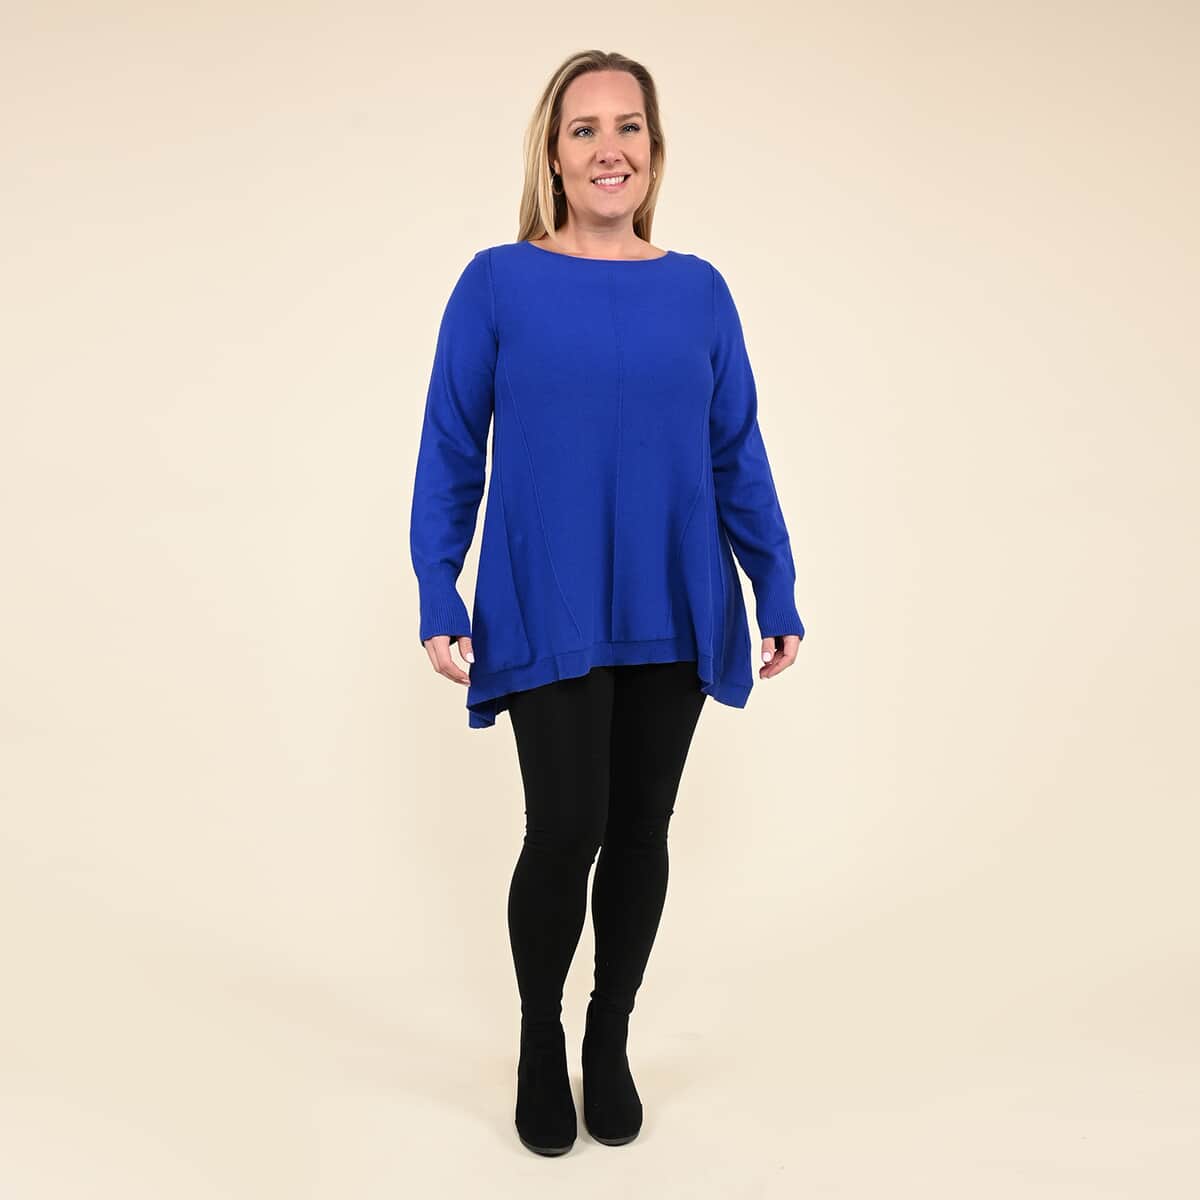 Tamsy Blue Long Sleeves with Ribbed Cuffs, Crew Neck Tunic Sweater - XL image number 0